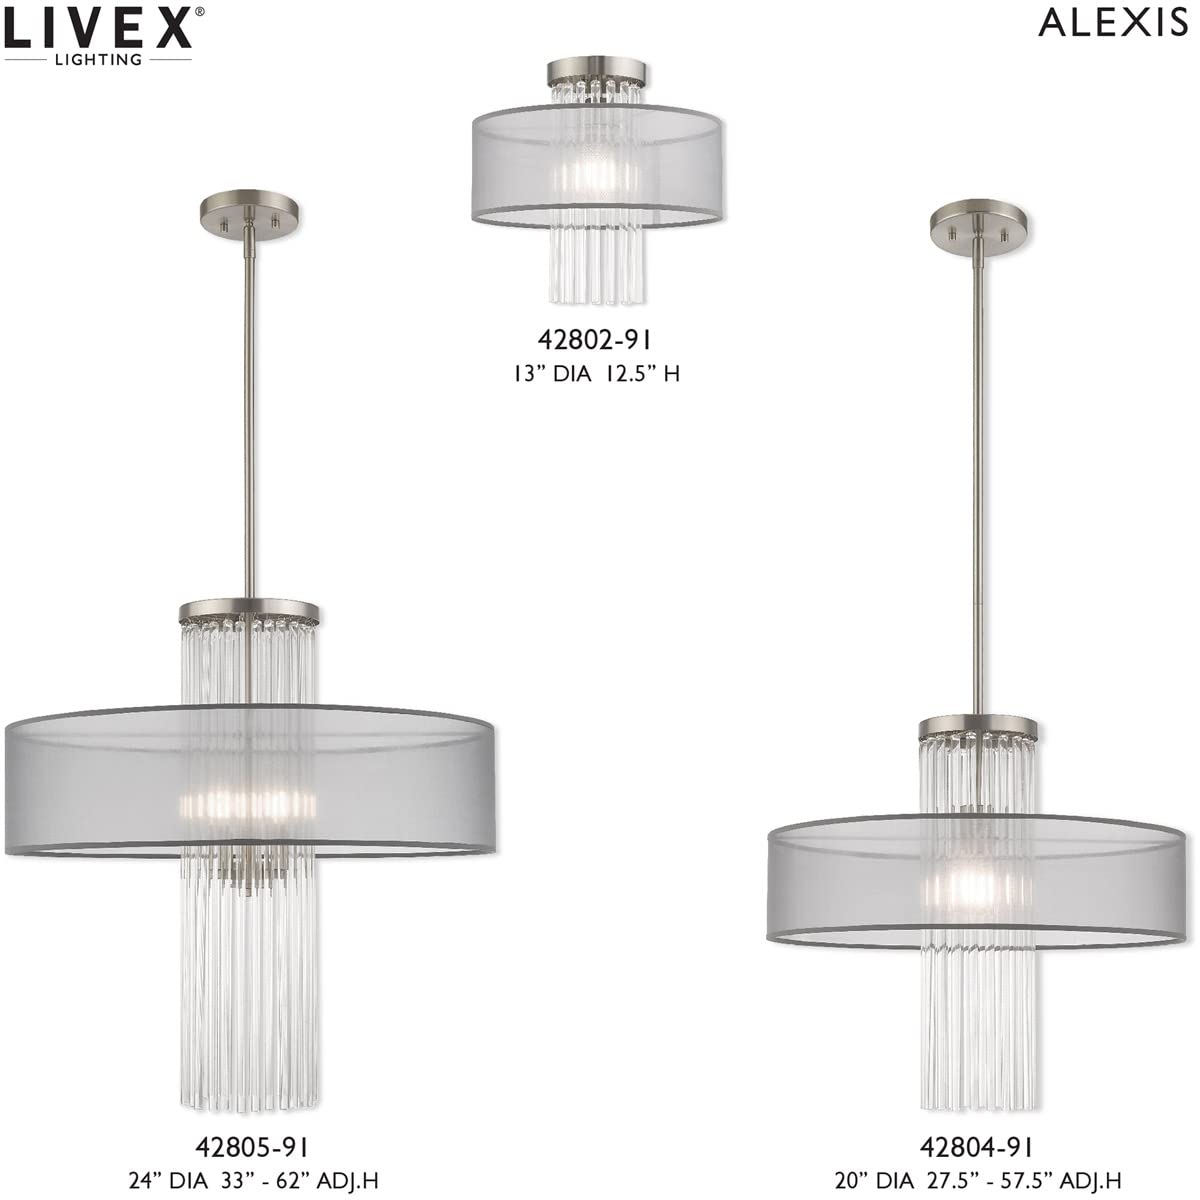 Livex Lighting 42805-91 Alexis - Four Light Chandelier, Brushed Nickel Finish with Translucent Gray Fabric Shade with Clear Rods Crystal